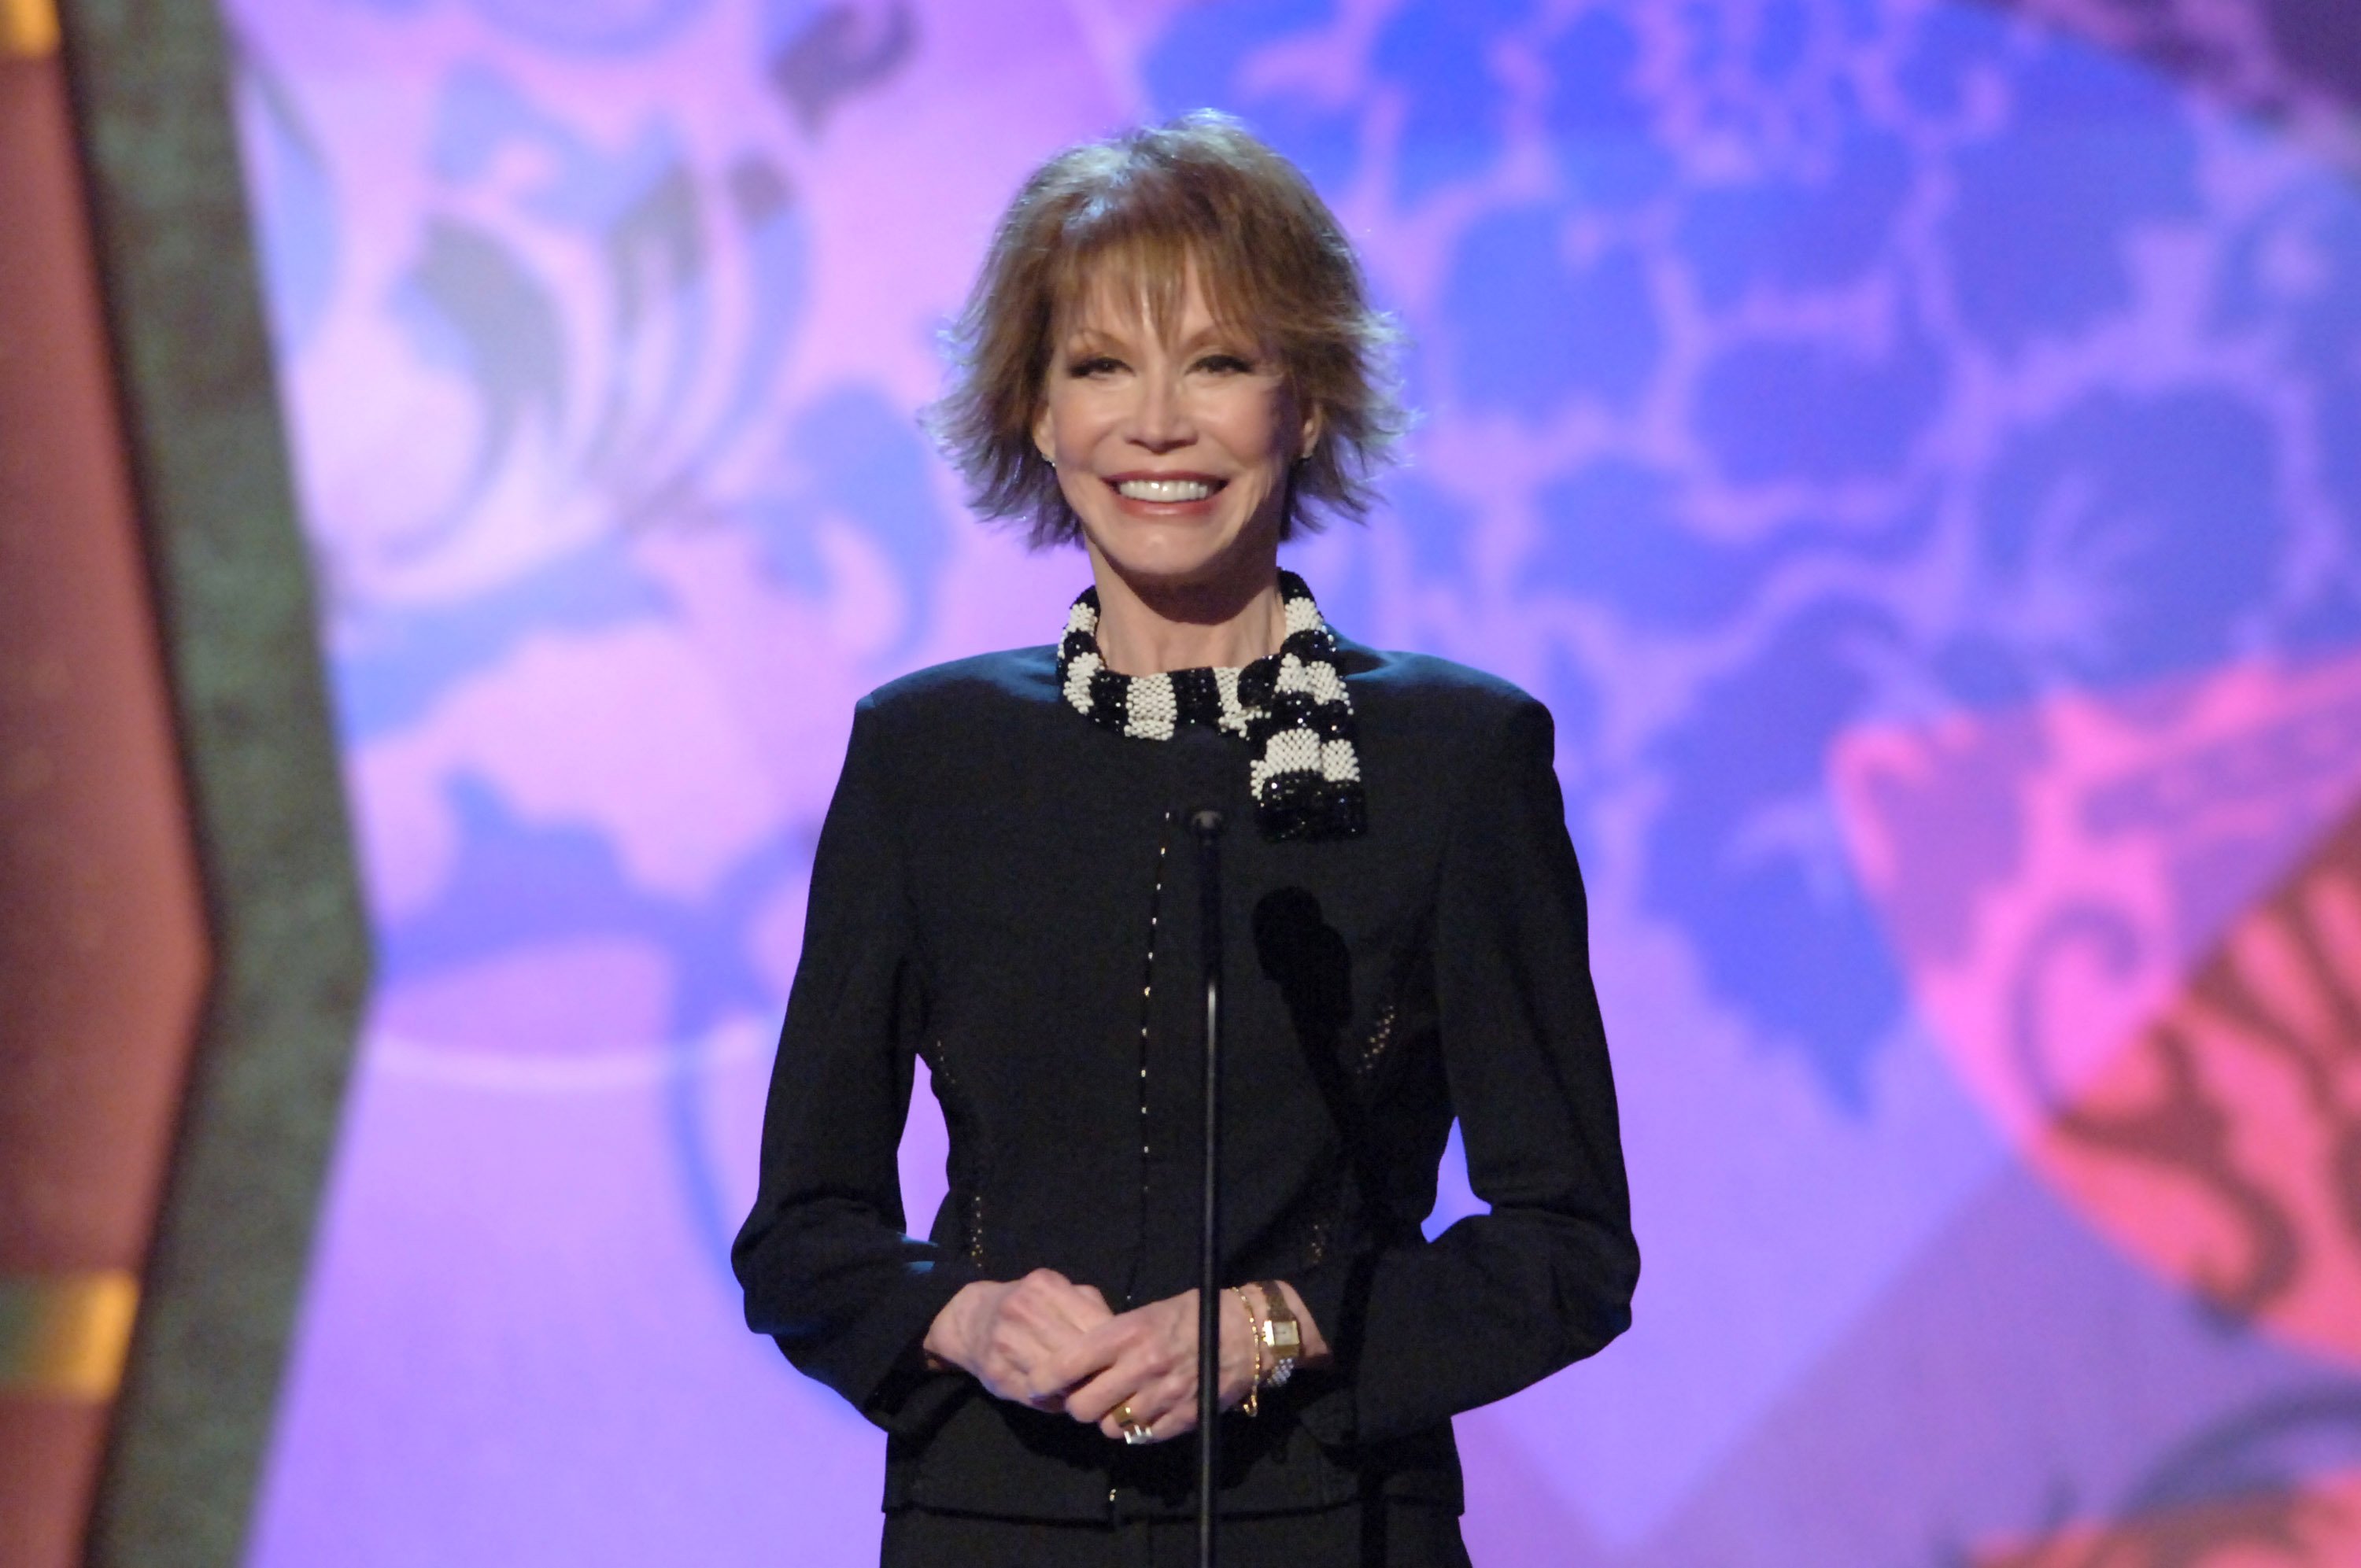 Mary Tyler Moore, presenter during 4th Annual TV Land Awards - Show at Barker Hangar in Santa Monica, California, United States.| Photo: Getty Images